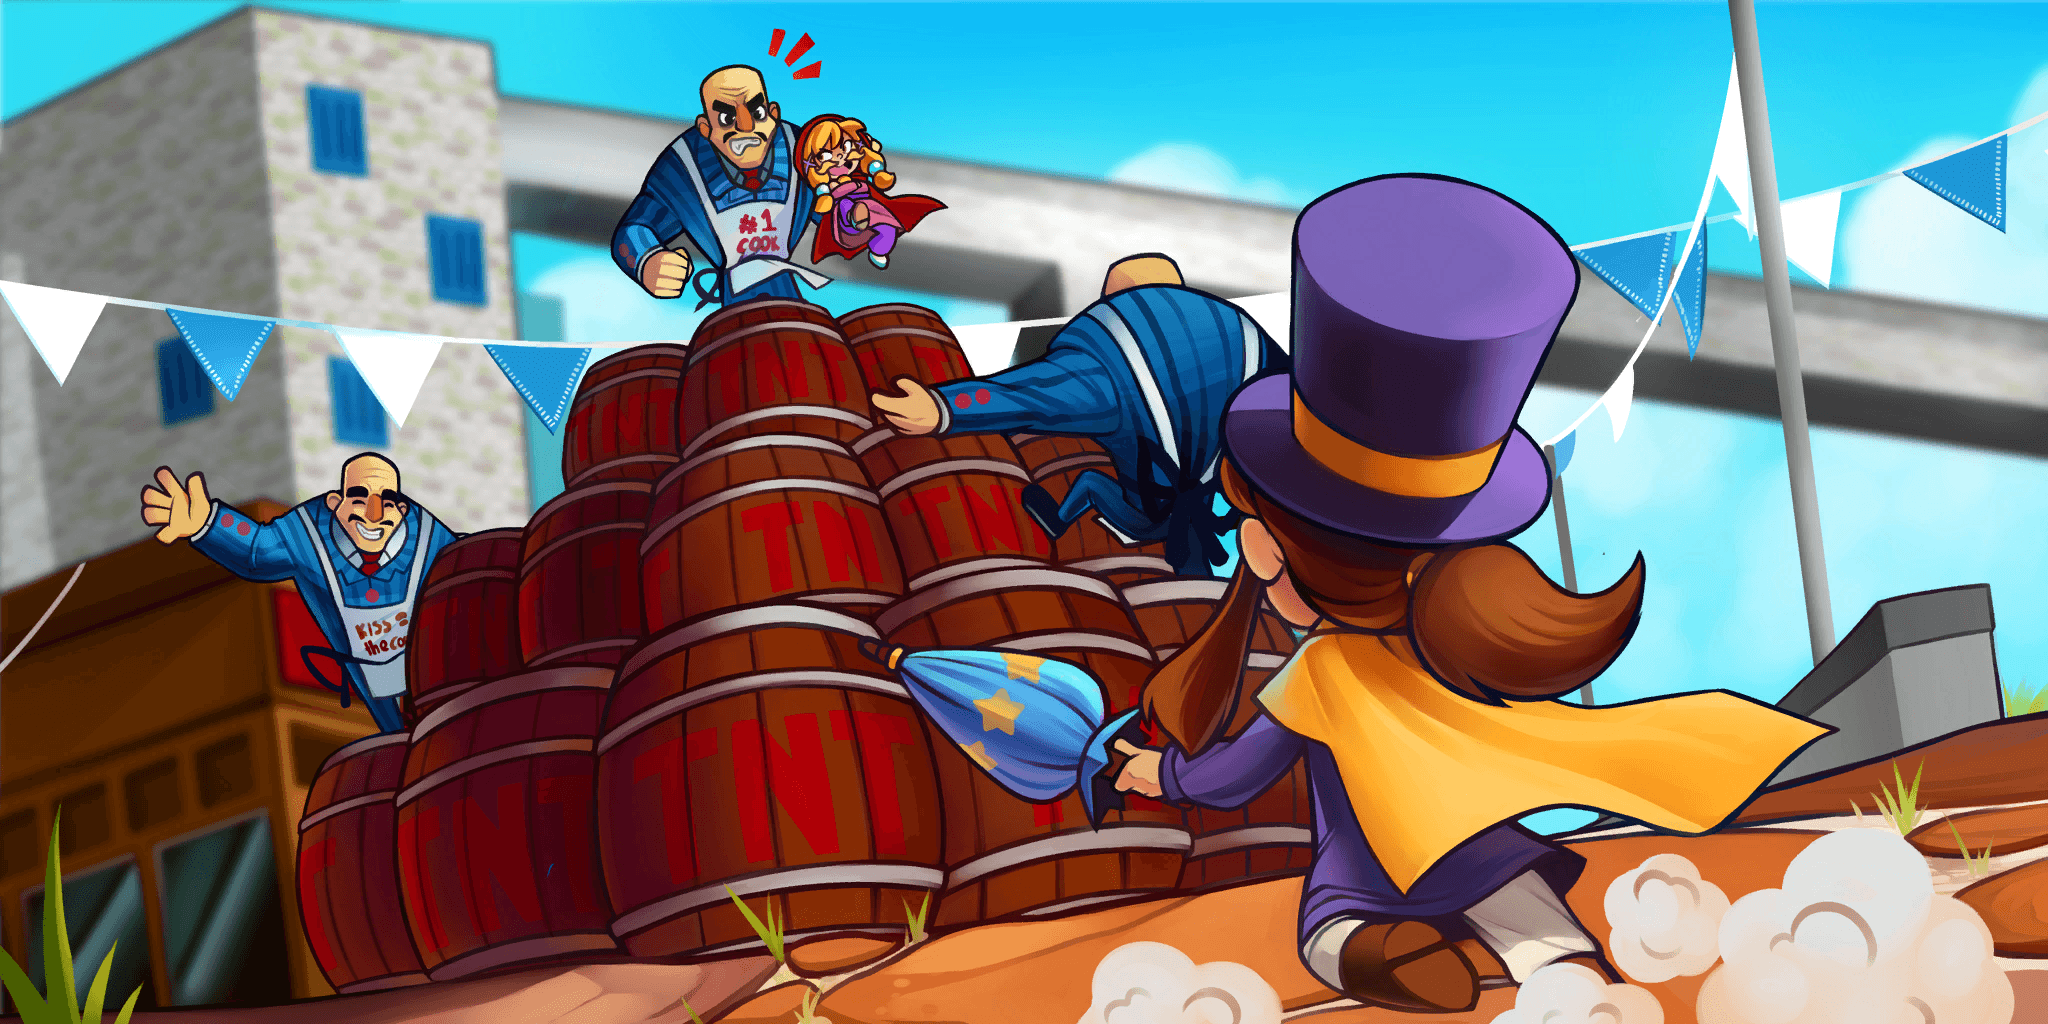 A Hat in Time HD Wallpaper and Background Image